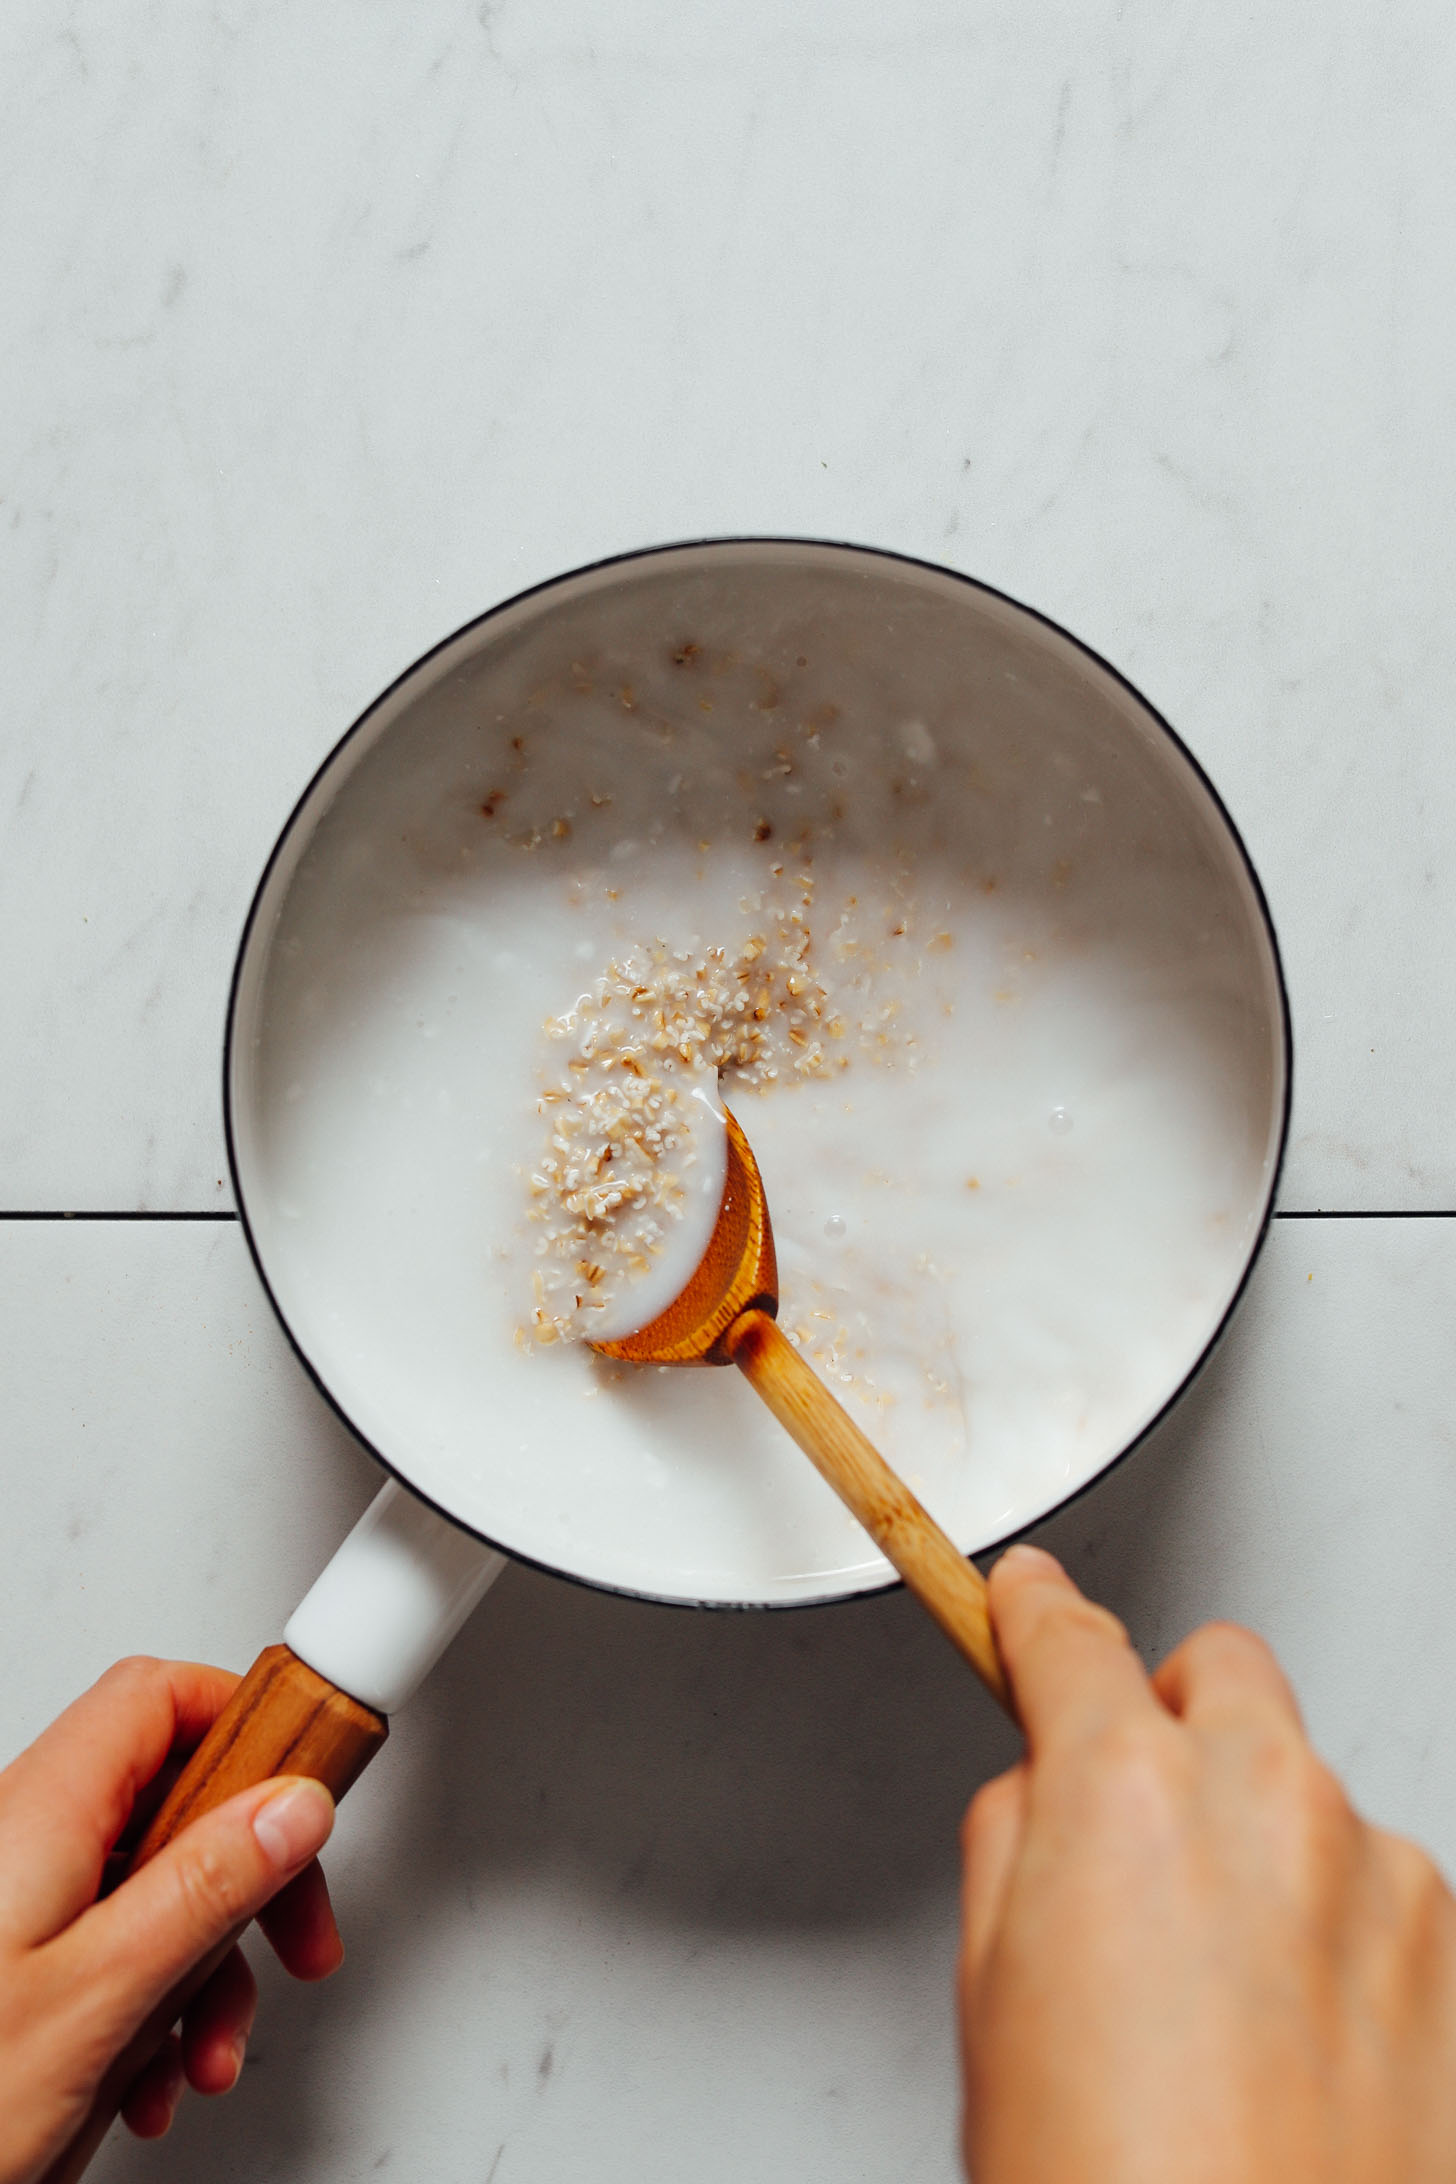 Using a wooden spoon to stir a pan of steel cut oats